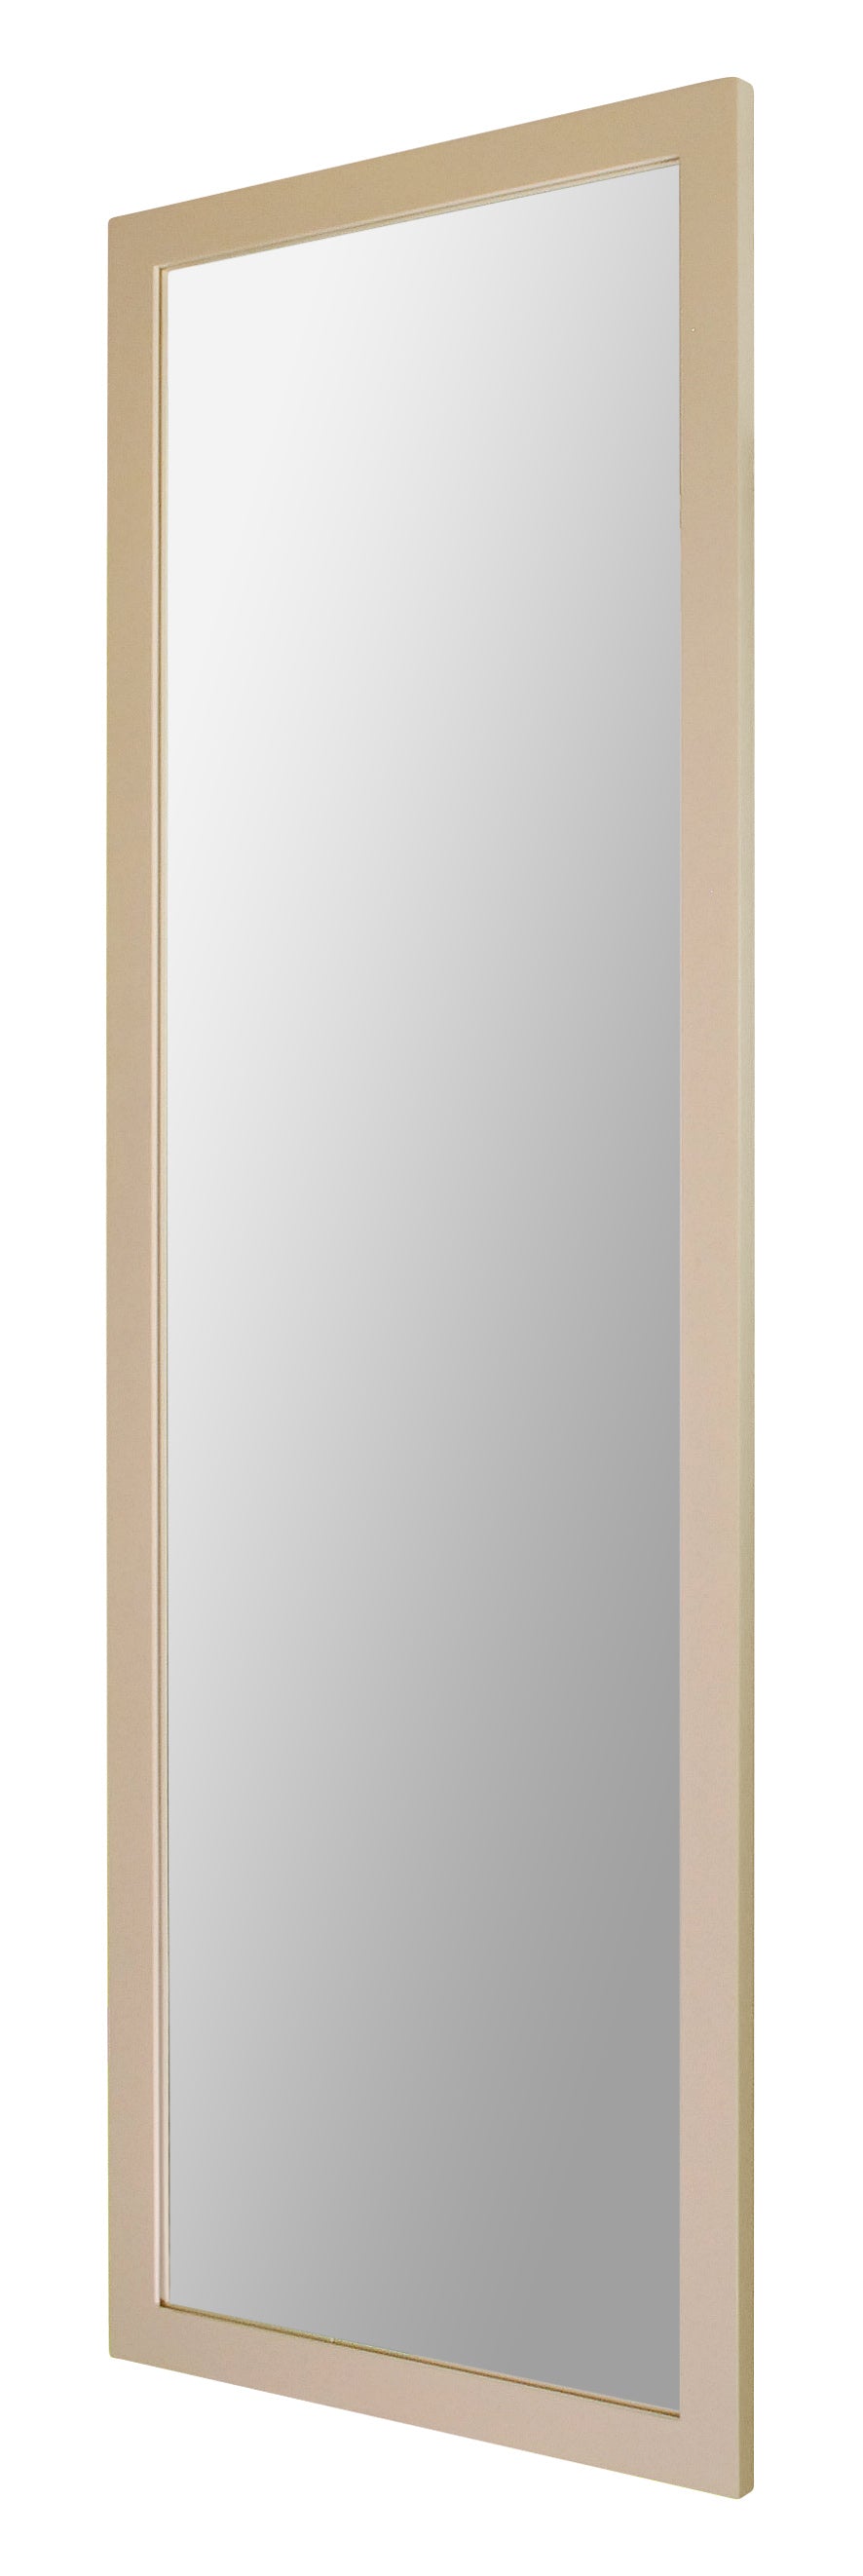 Full-Height Mirror with Wood Frame and custom-made finish.